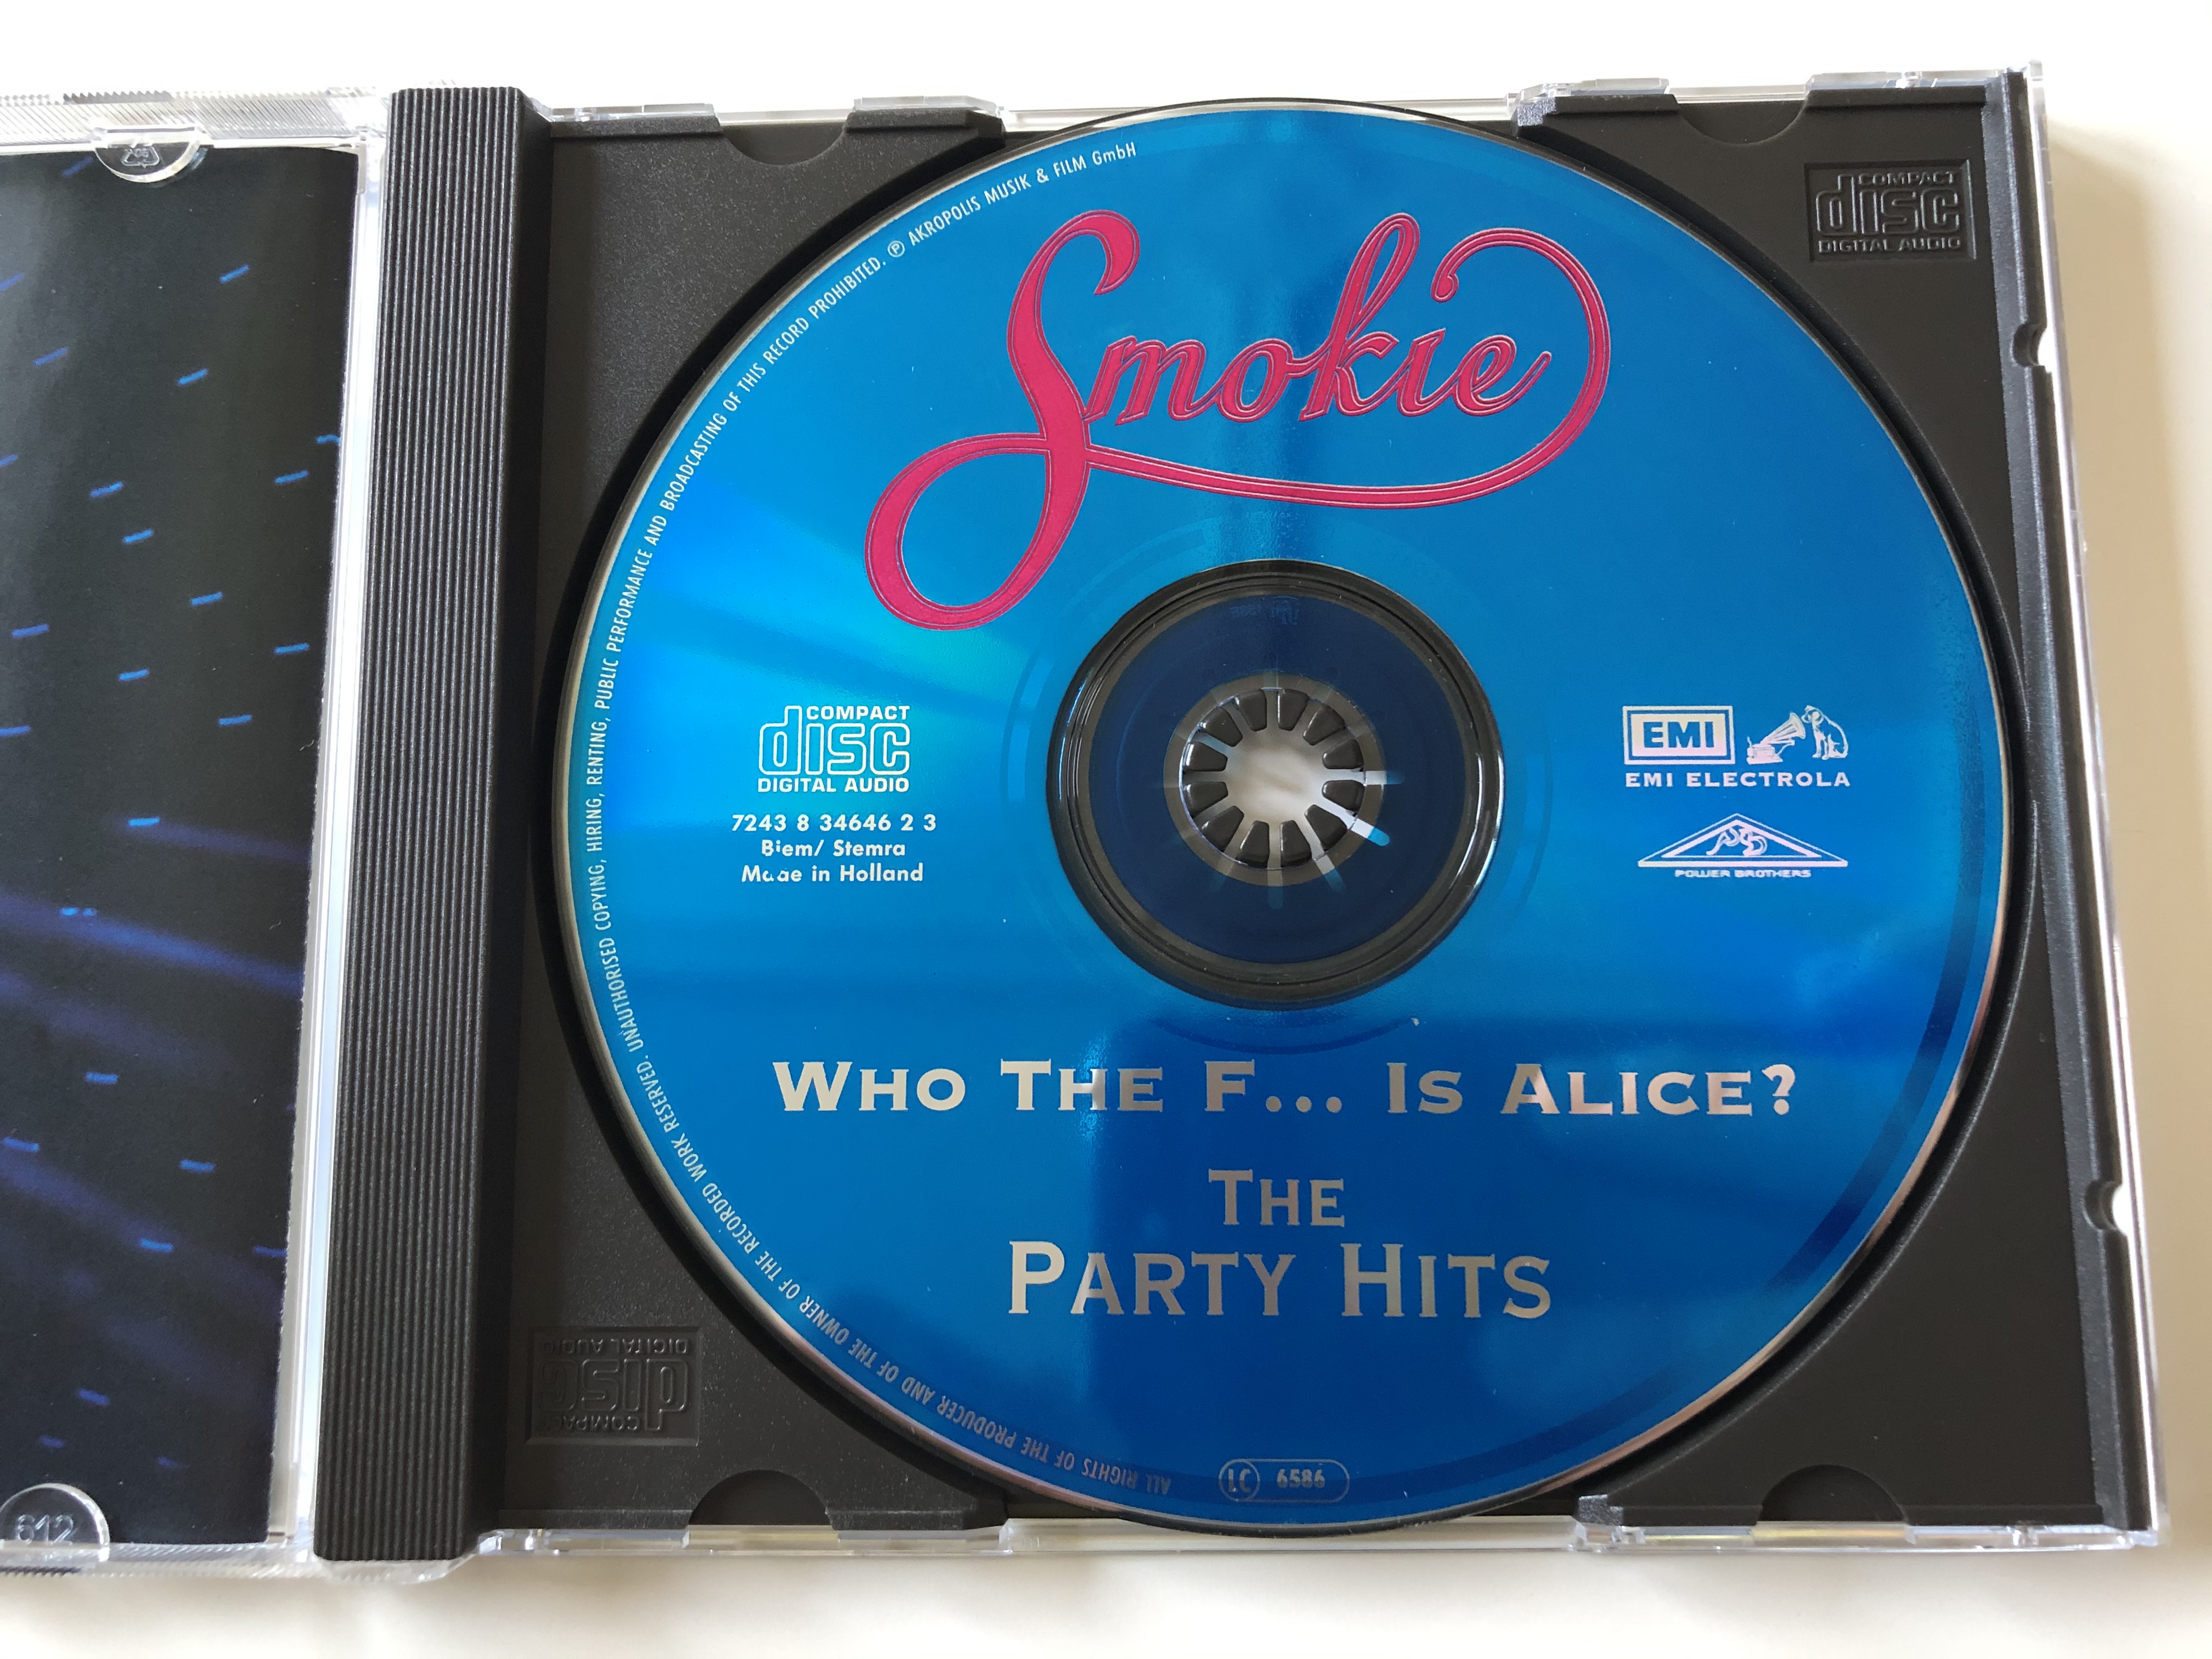 who-the-f...-is-alice-smokie-the-party-hits-incl.-who-the-f...-is-alice-surfin-needles-and-pins-tambourine-man-don-t-play-your-rock-n-roll-to-me-oh-carol-emi-electrola-audio-cd-72-4-.jpg